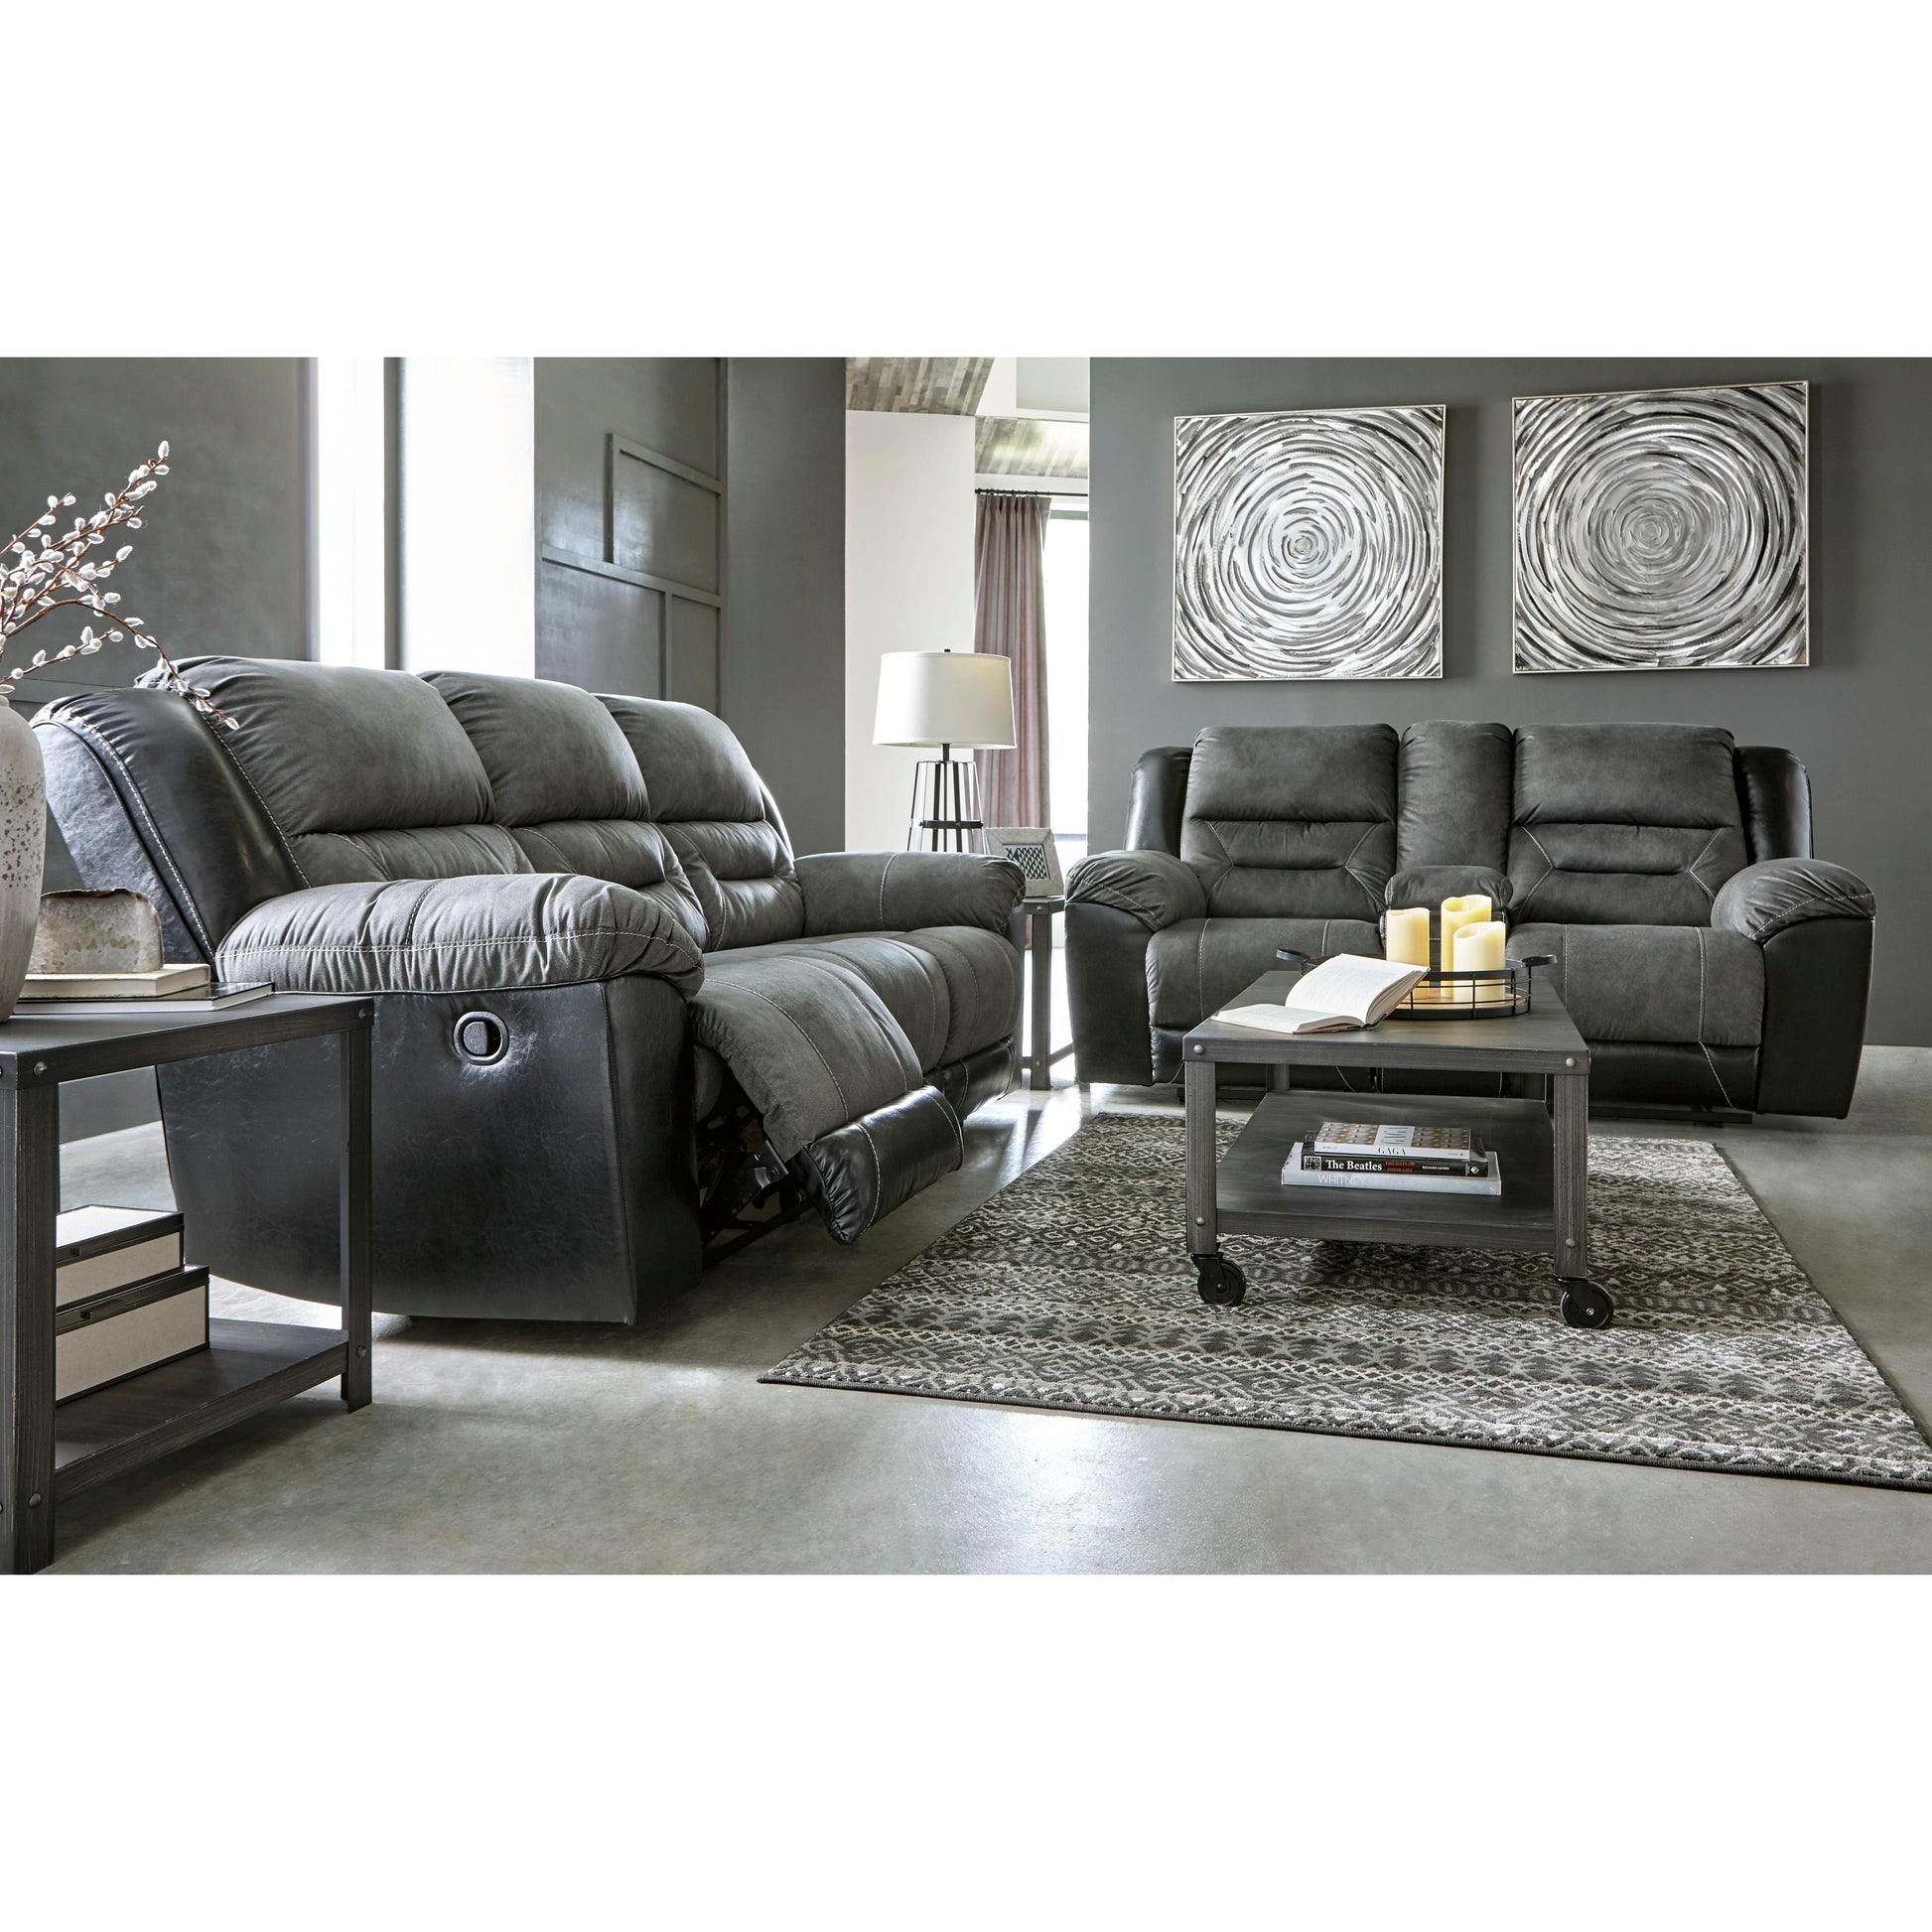 Signature Design by Ashley Earhart Reclining Fabric and Leather Look Sofa 2910288